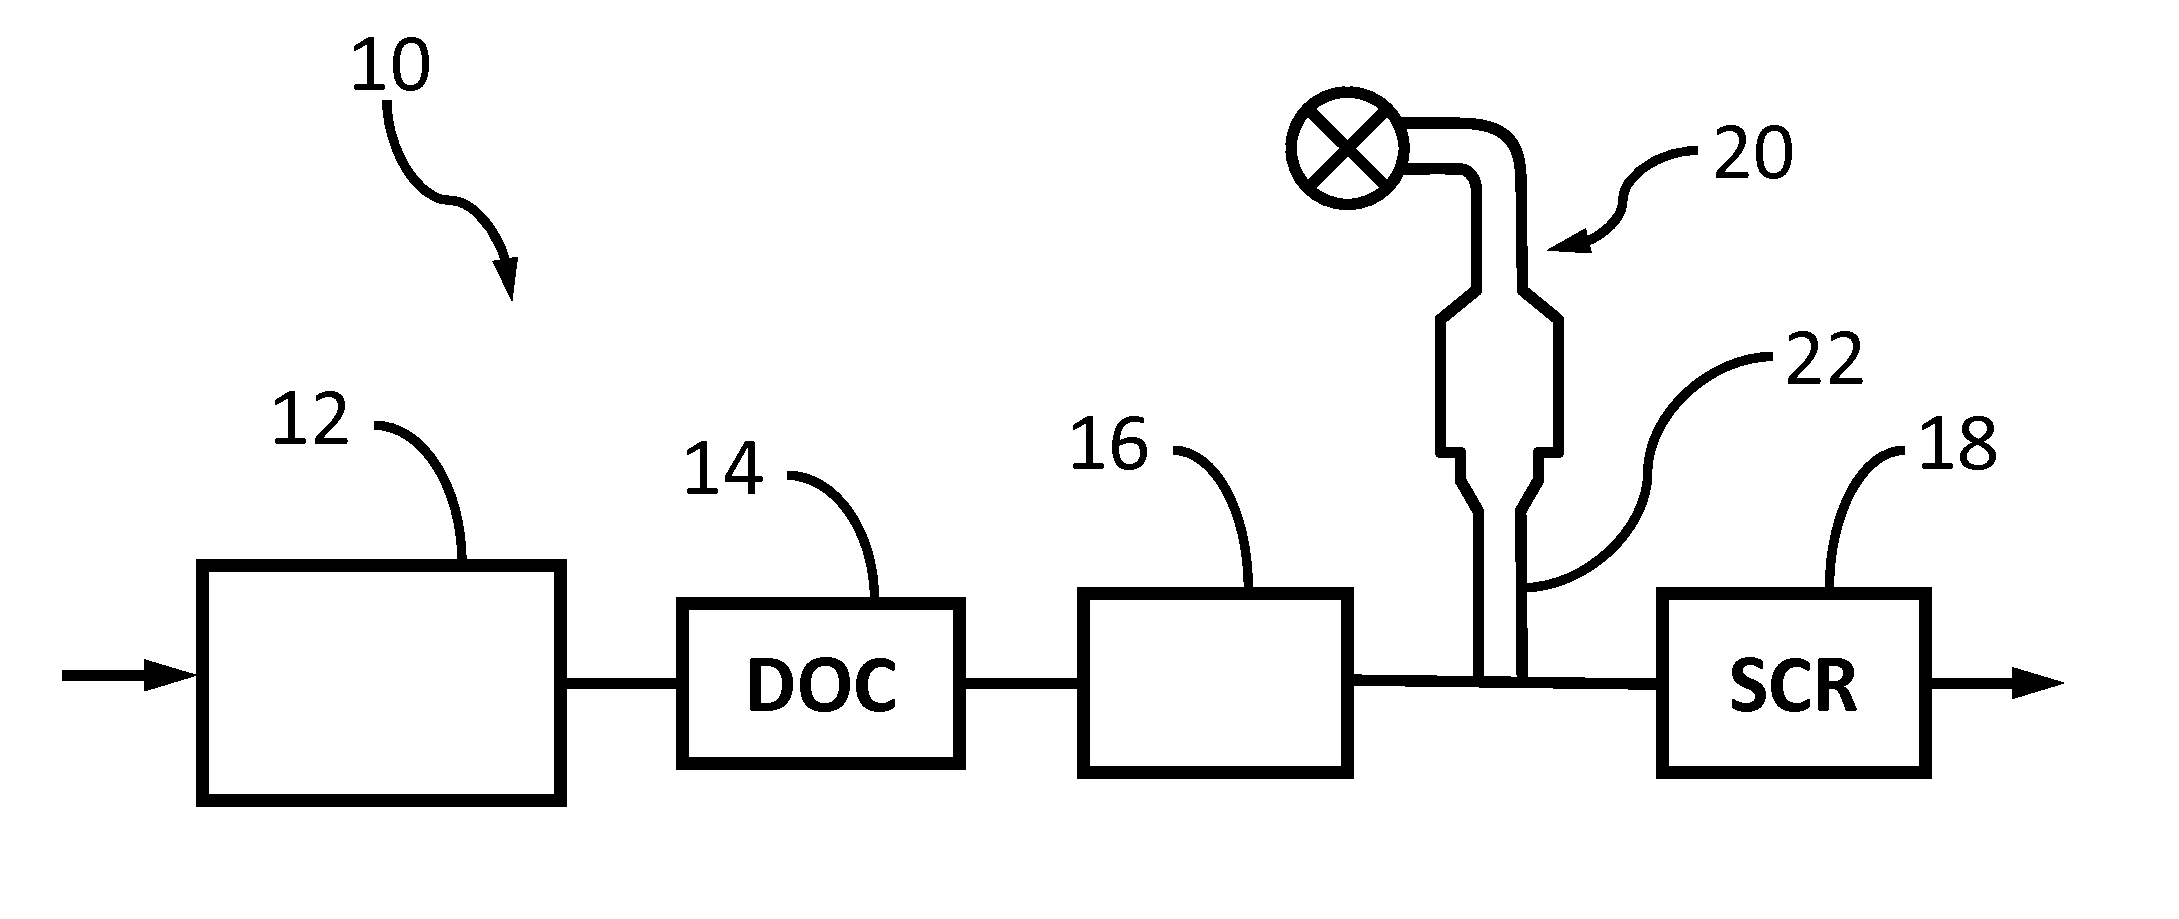 Diesel engine exhaust treatment system and method including a platinum group metal trapping device